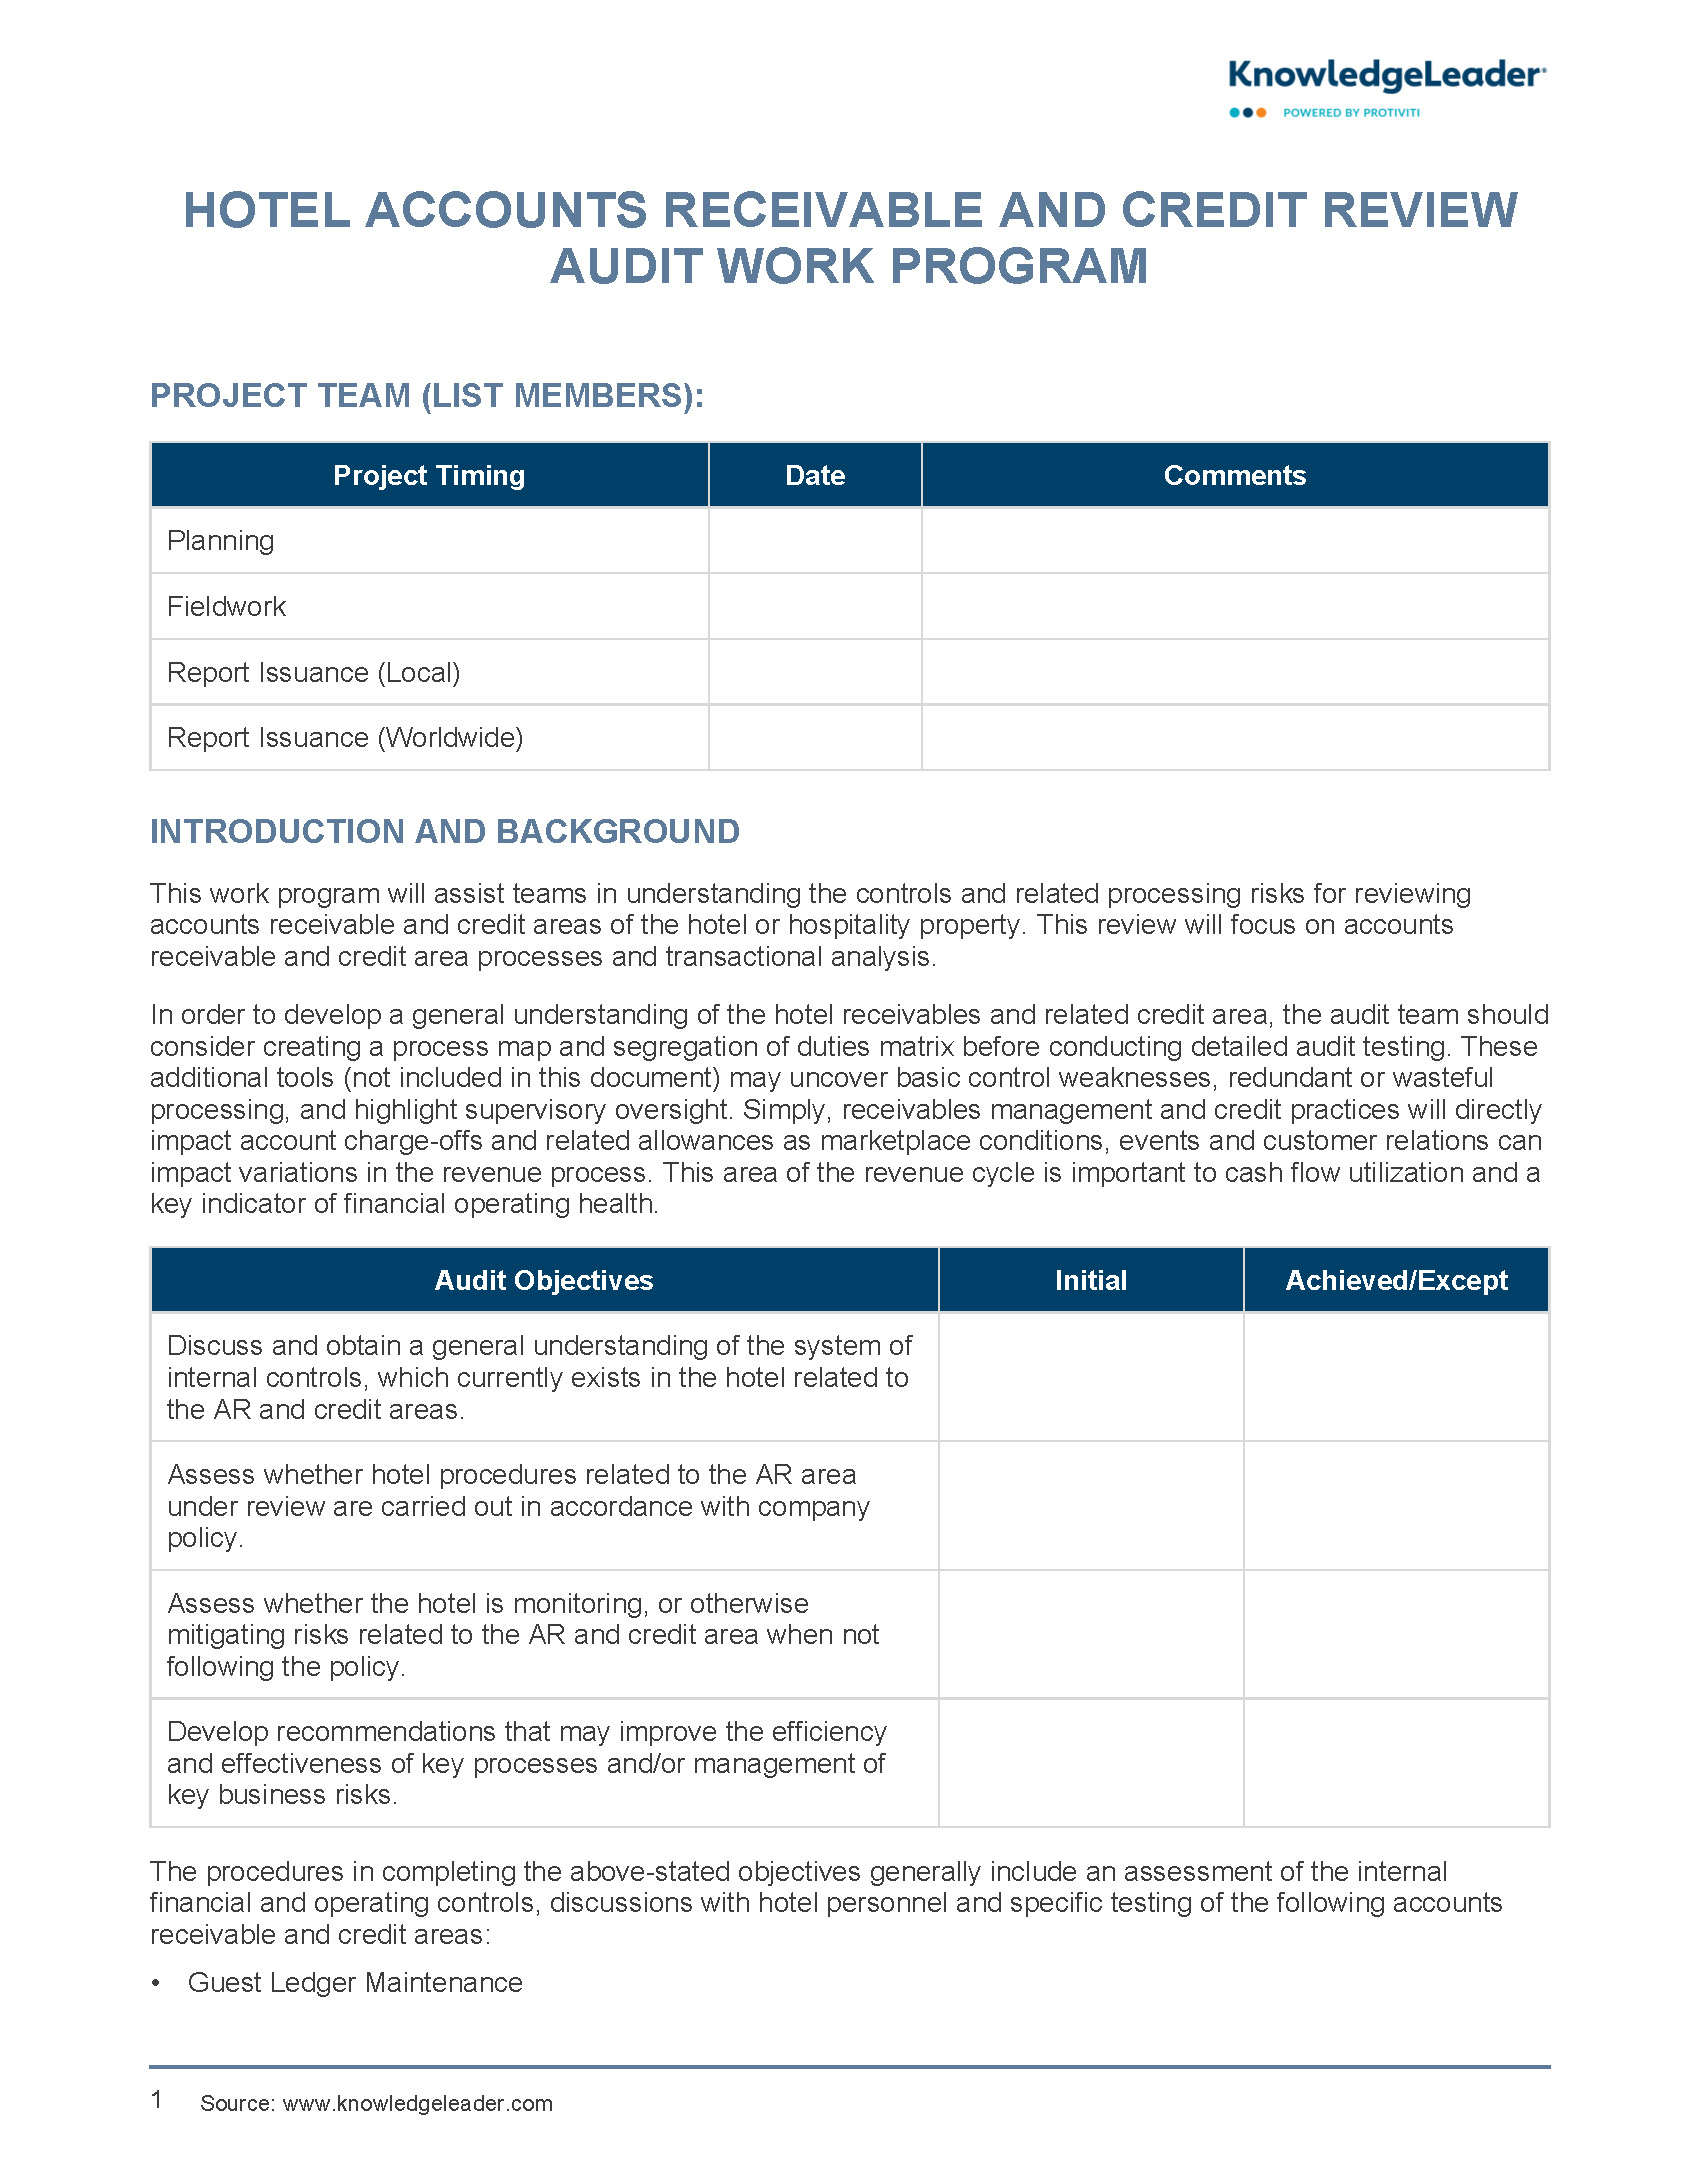 Screenshot of the first page of Hotel Accounts Receivable and Credit Review Audit Work Program